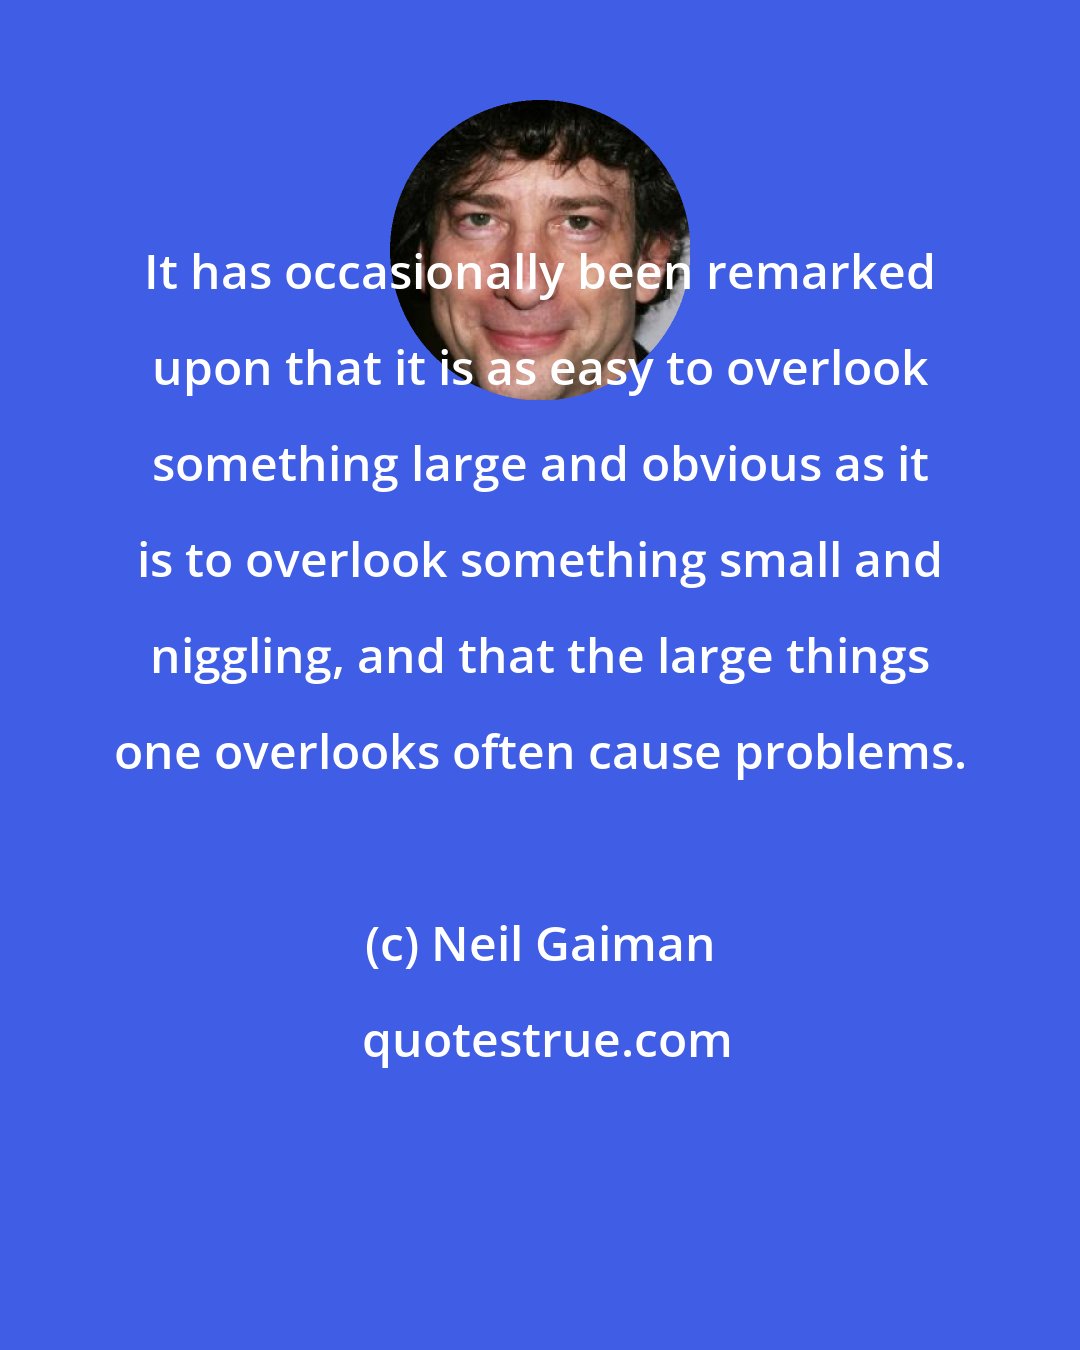 Neil Gaiman: It has occasionally been remarked upon that it is as easy to overlook something large and obvious as it is to overlook something small and niggling, and that the large things one overlooks often cause problems.